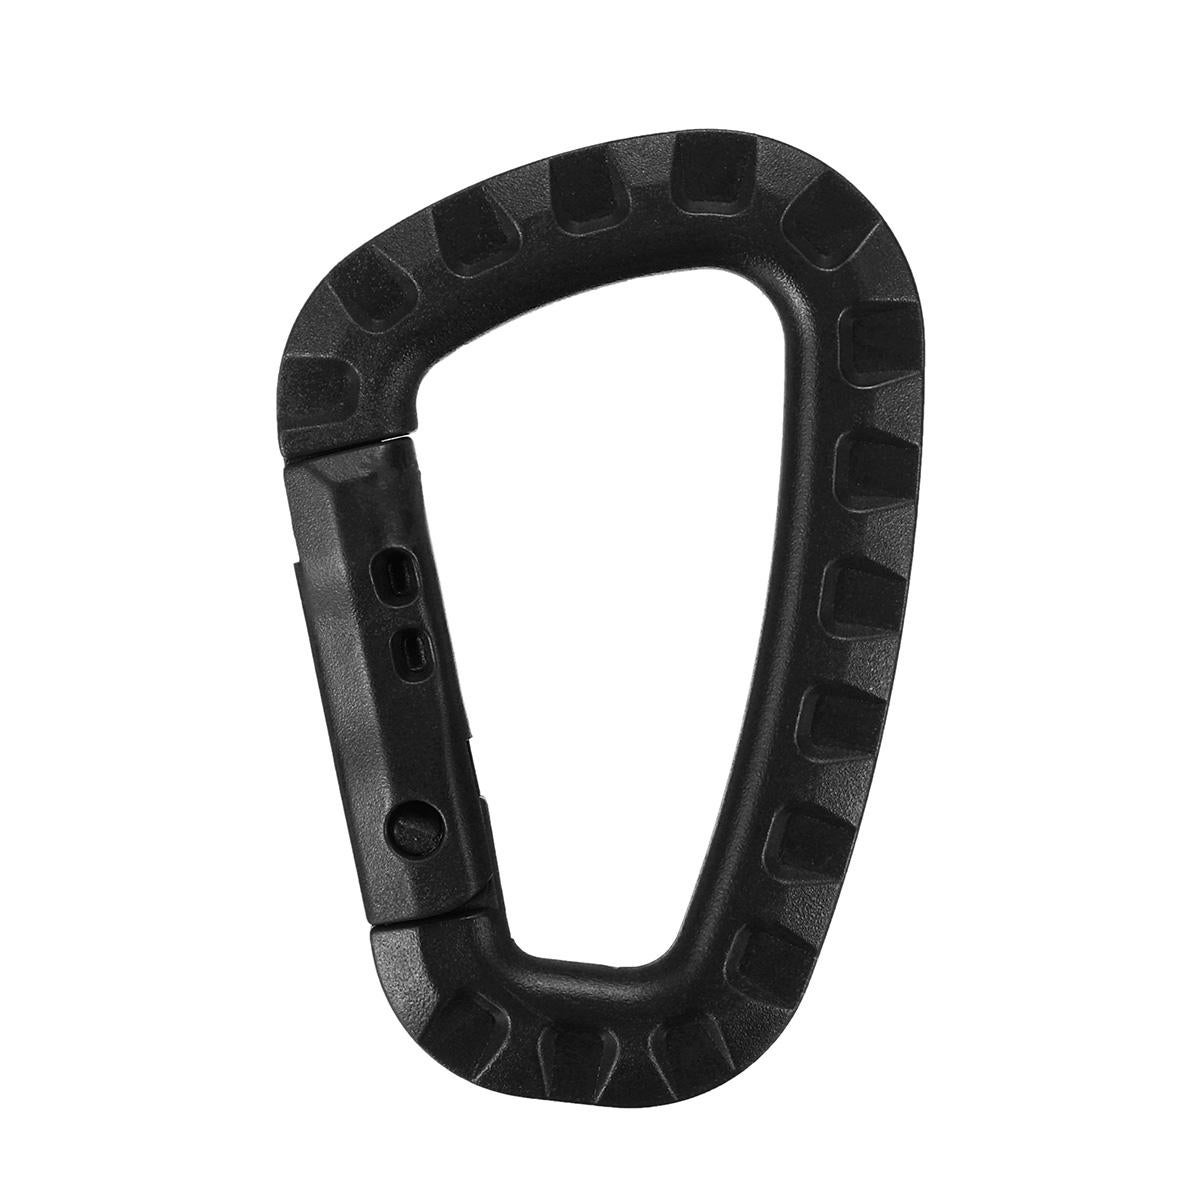 12PcsSmall Caribeaner Keychain Clip Spring Link D Shape Carabiner Fast Hang Buckle Climbing Hook Key Chain Black